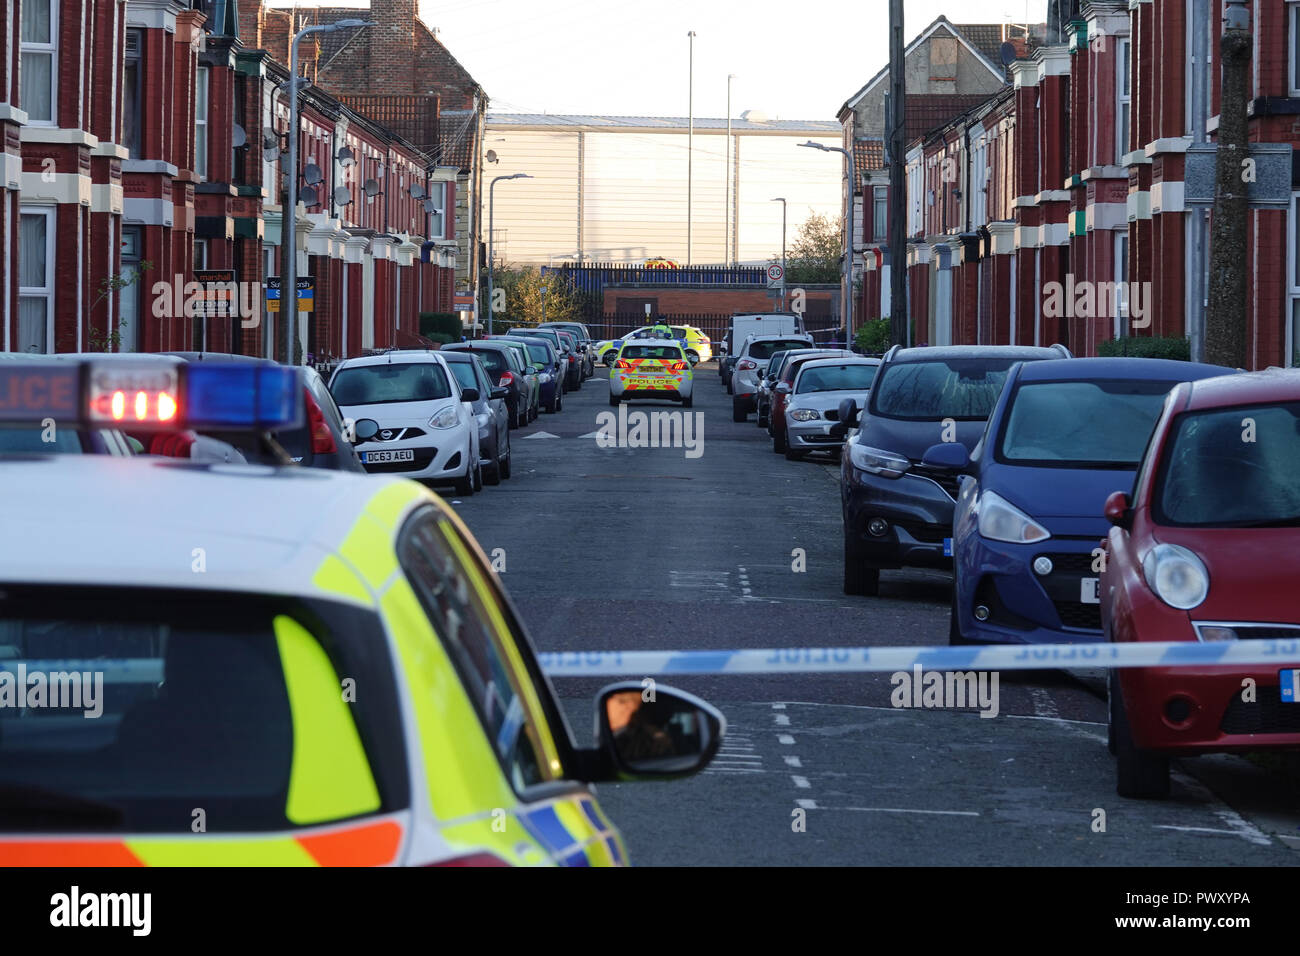 Liverpool, UK. 18th October 2018. A murder investigation is underway after a man was shot multiple times outside a South Liverpool house dies of his injuries. Armed police swooped on Alderson Road, Wavertree, at about 10.40pm on Wednesday night after reports of four shots being fired. Police confirmed a murder probe has been launched after the 25-year-old victim died in hospital during the early hours of Thursday morning. This was the sixth shooting on Merseyside in the last 10 days. Credit: Ken Biggs/Alamy Live News. Stock Photo